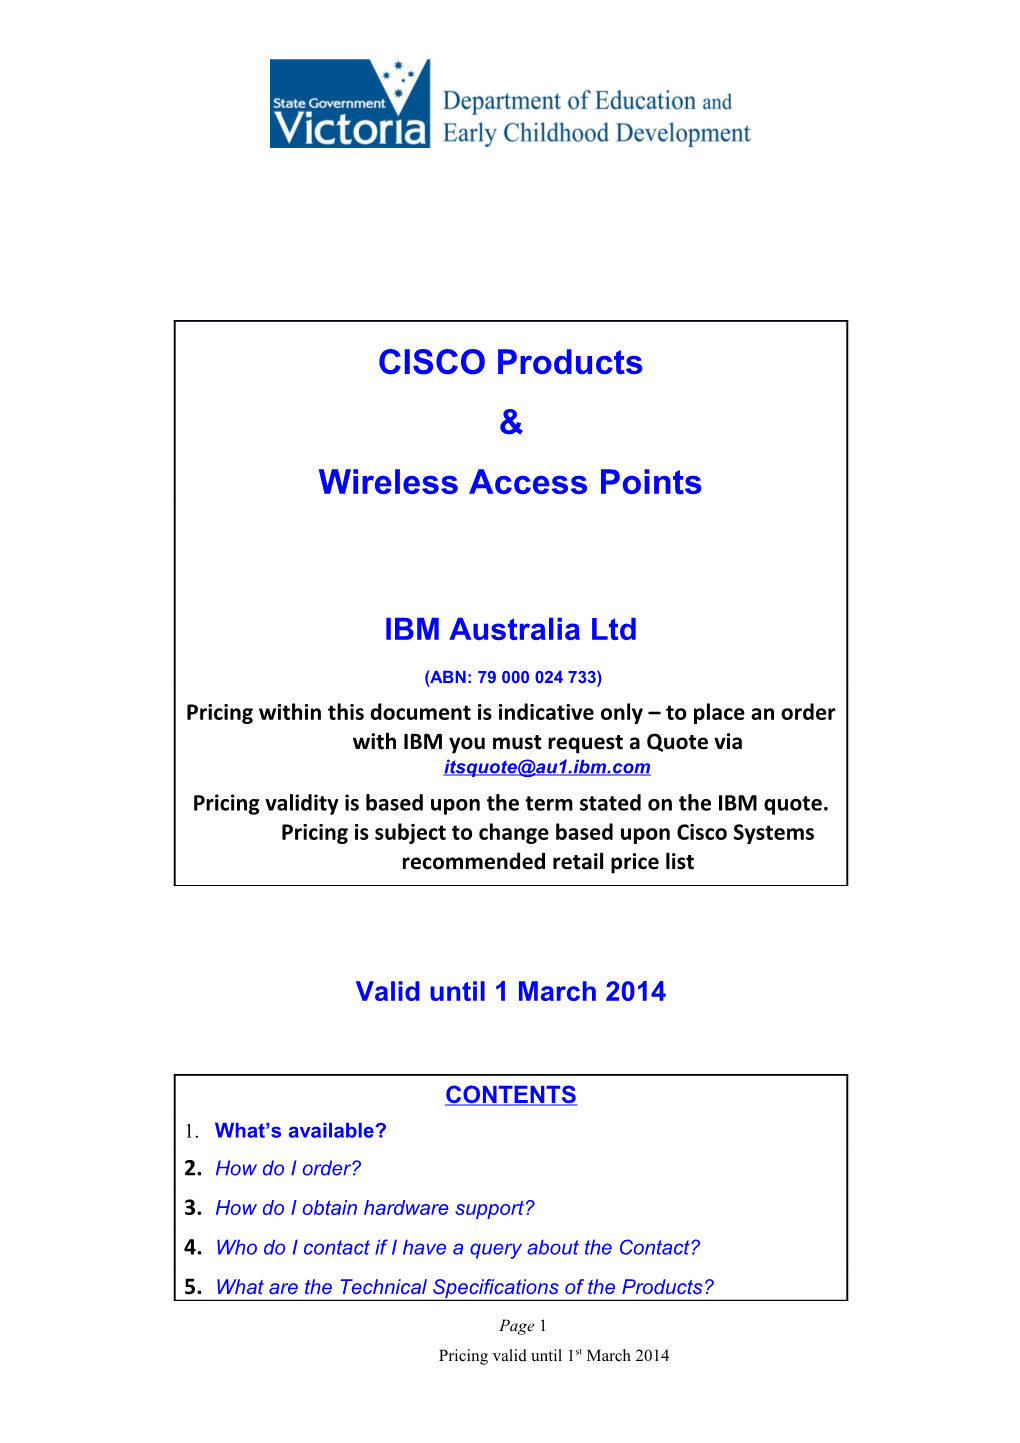 CISCO Products & Wireless Access Points Pricing